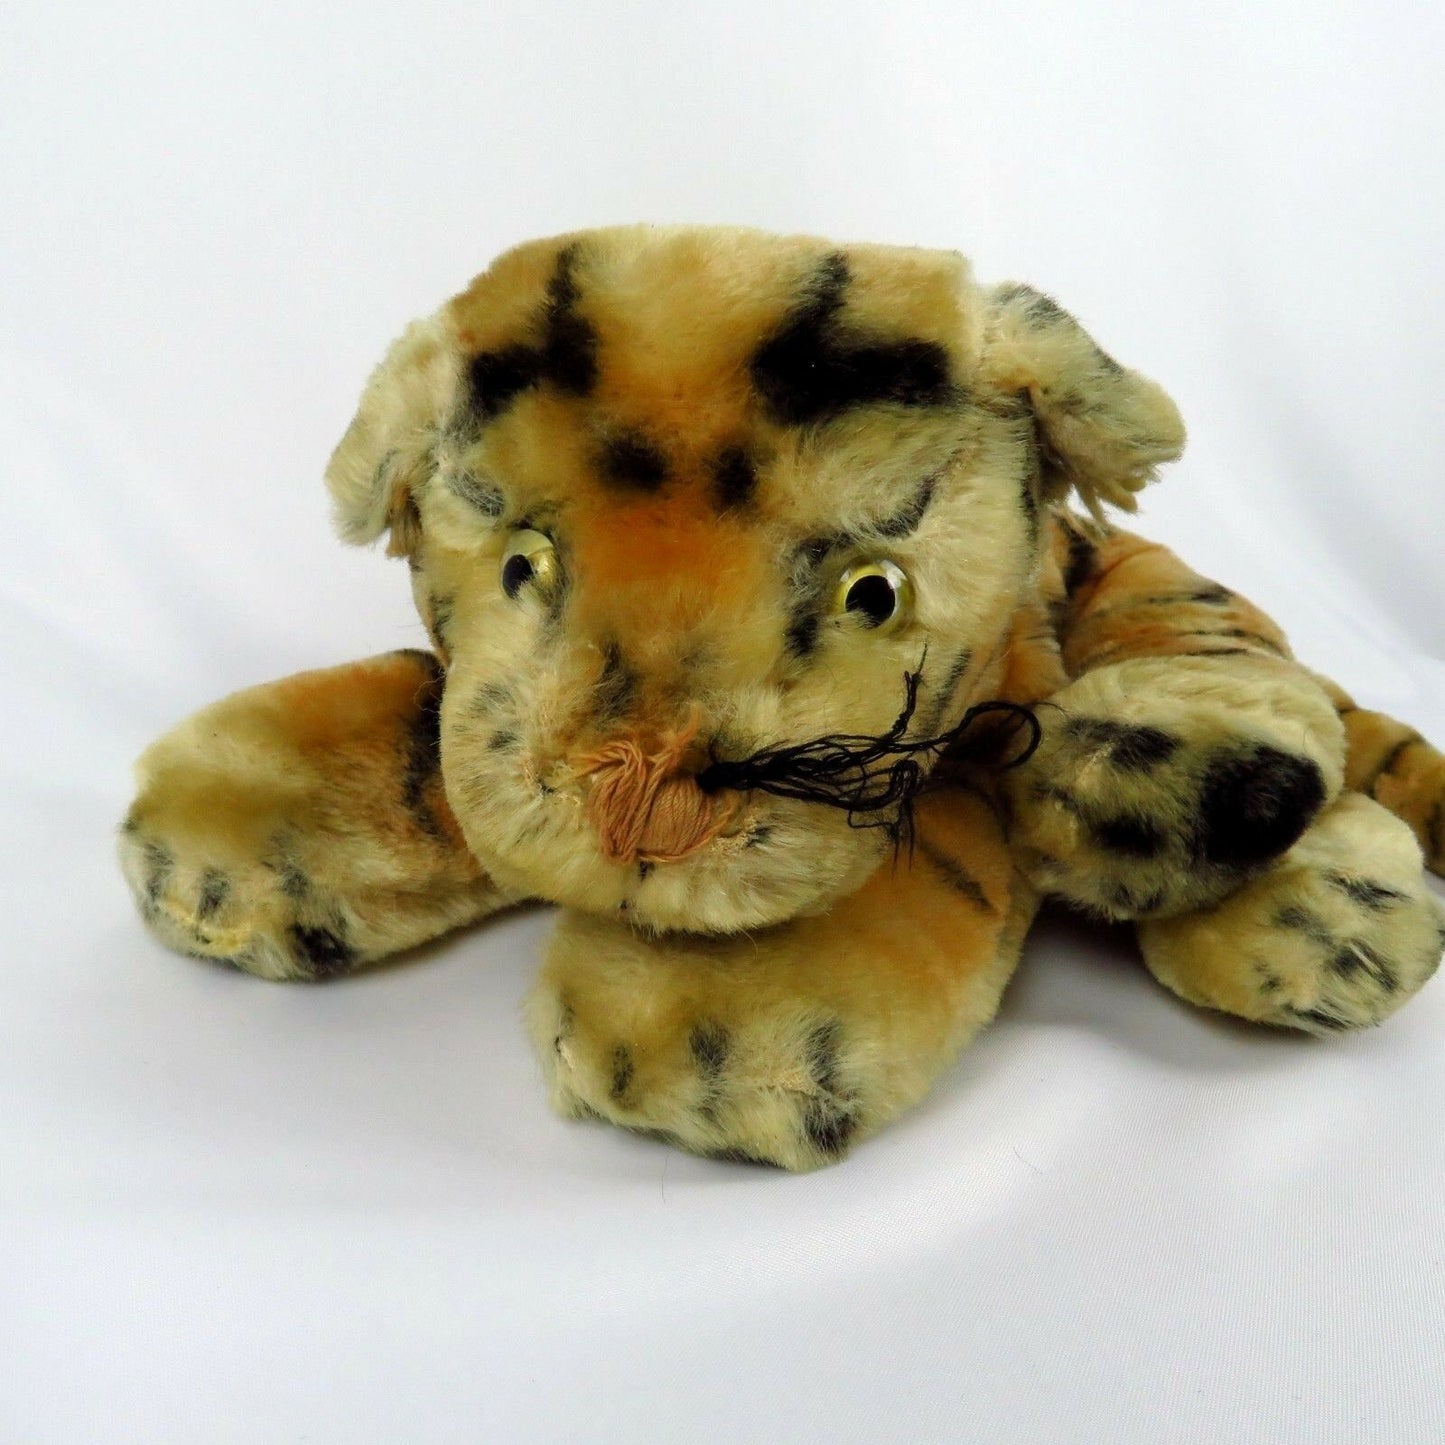 Vintage Mohair Tiger Cat Cub Plush Character Novelty Co Stuffed Animal Toy Doll - At Grandma's Table